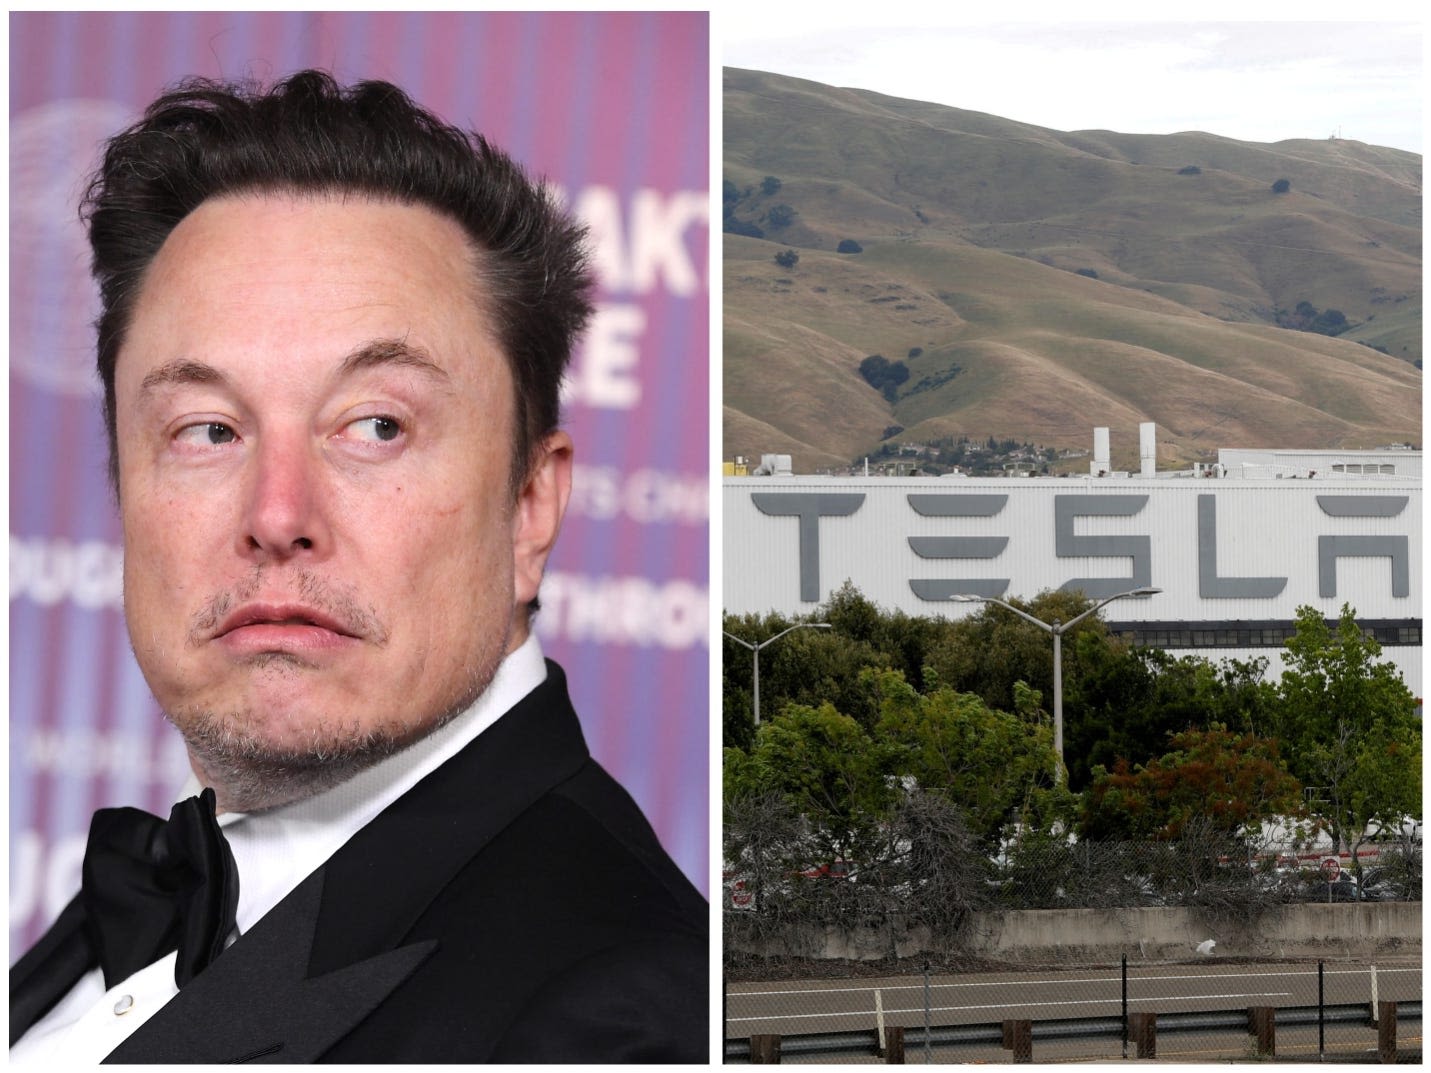 A fire broke out at Tesla's Fremont factory once again, this time due to an oven